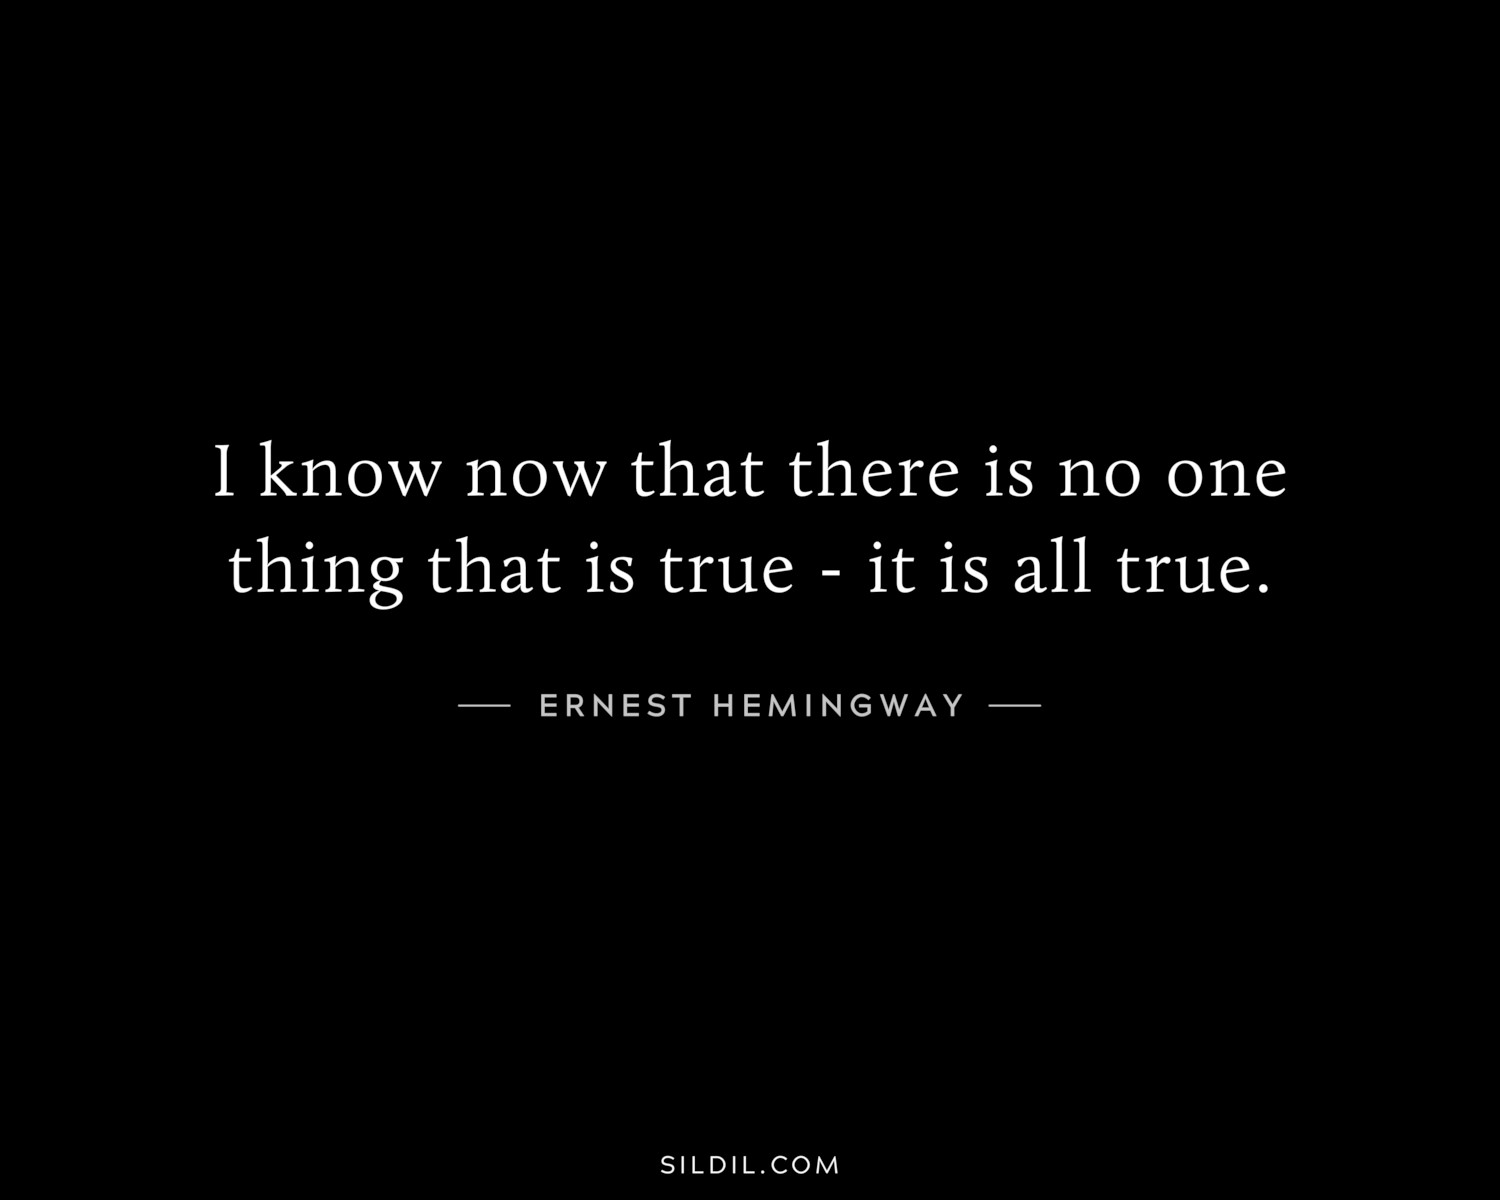 I know now that there is no one thing that is true - it is all true.